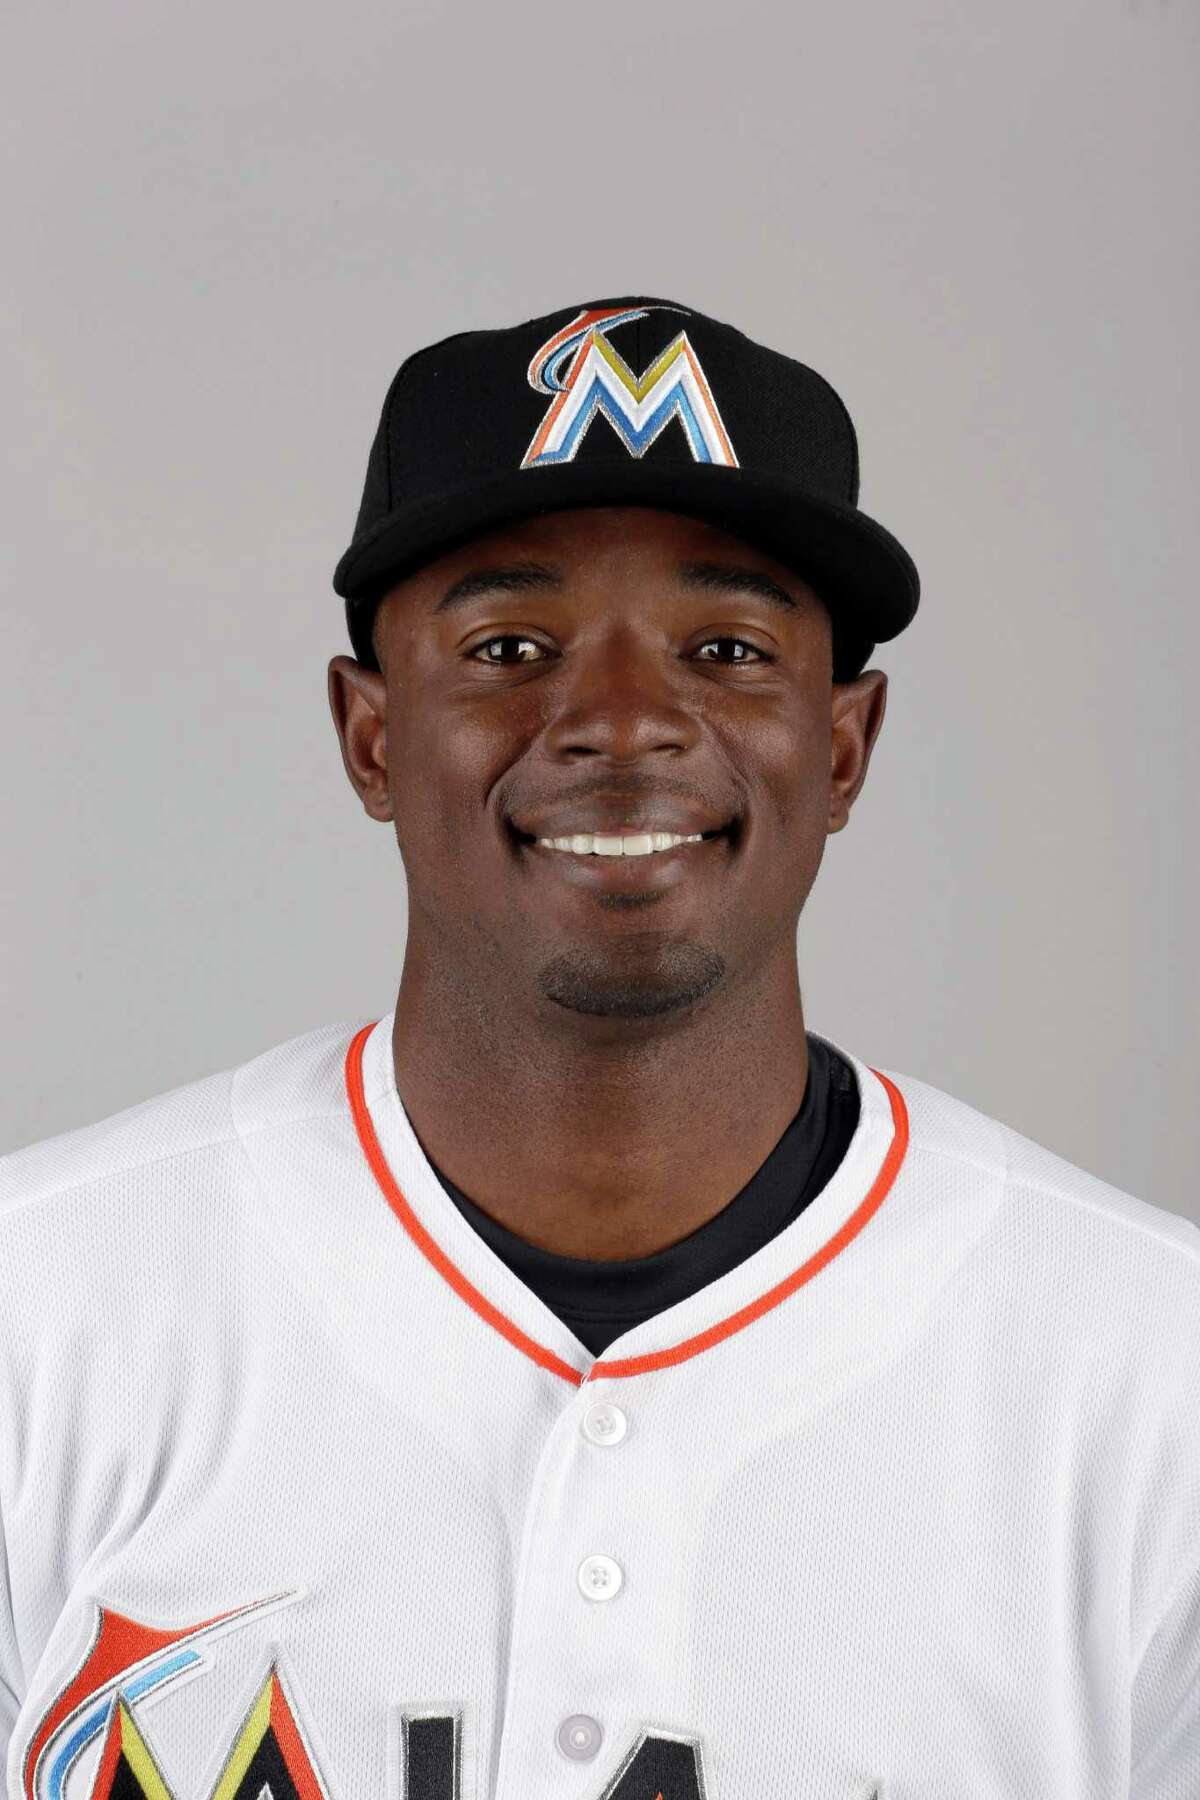 31 Top Pictures Miami Baseball Team Roster - Miami Marlins Where Did The 2020 40 Man Roster Come From